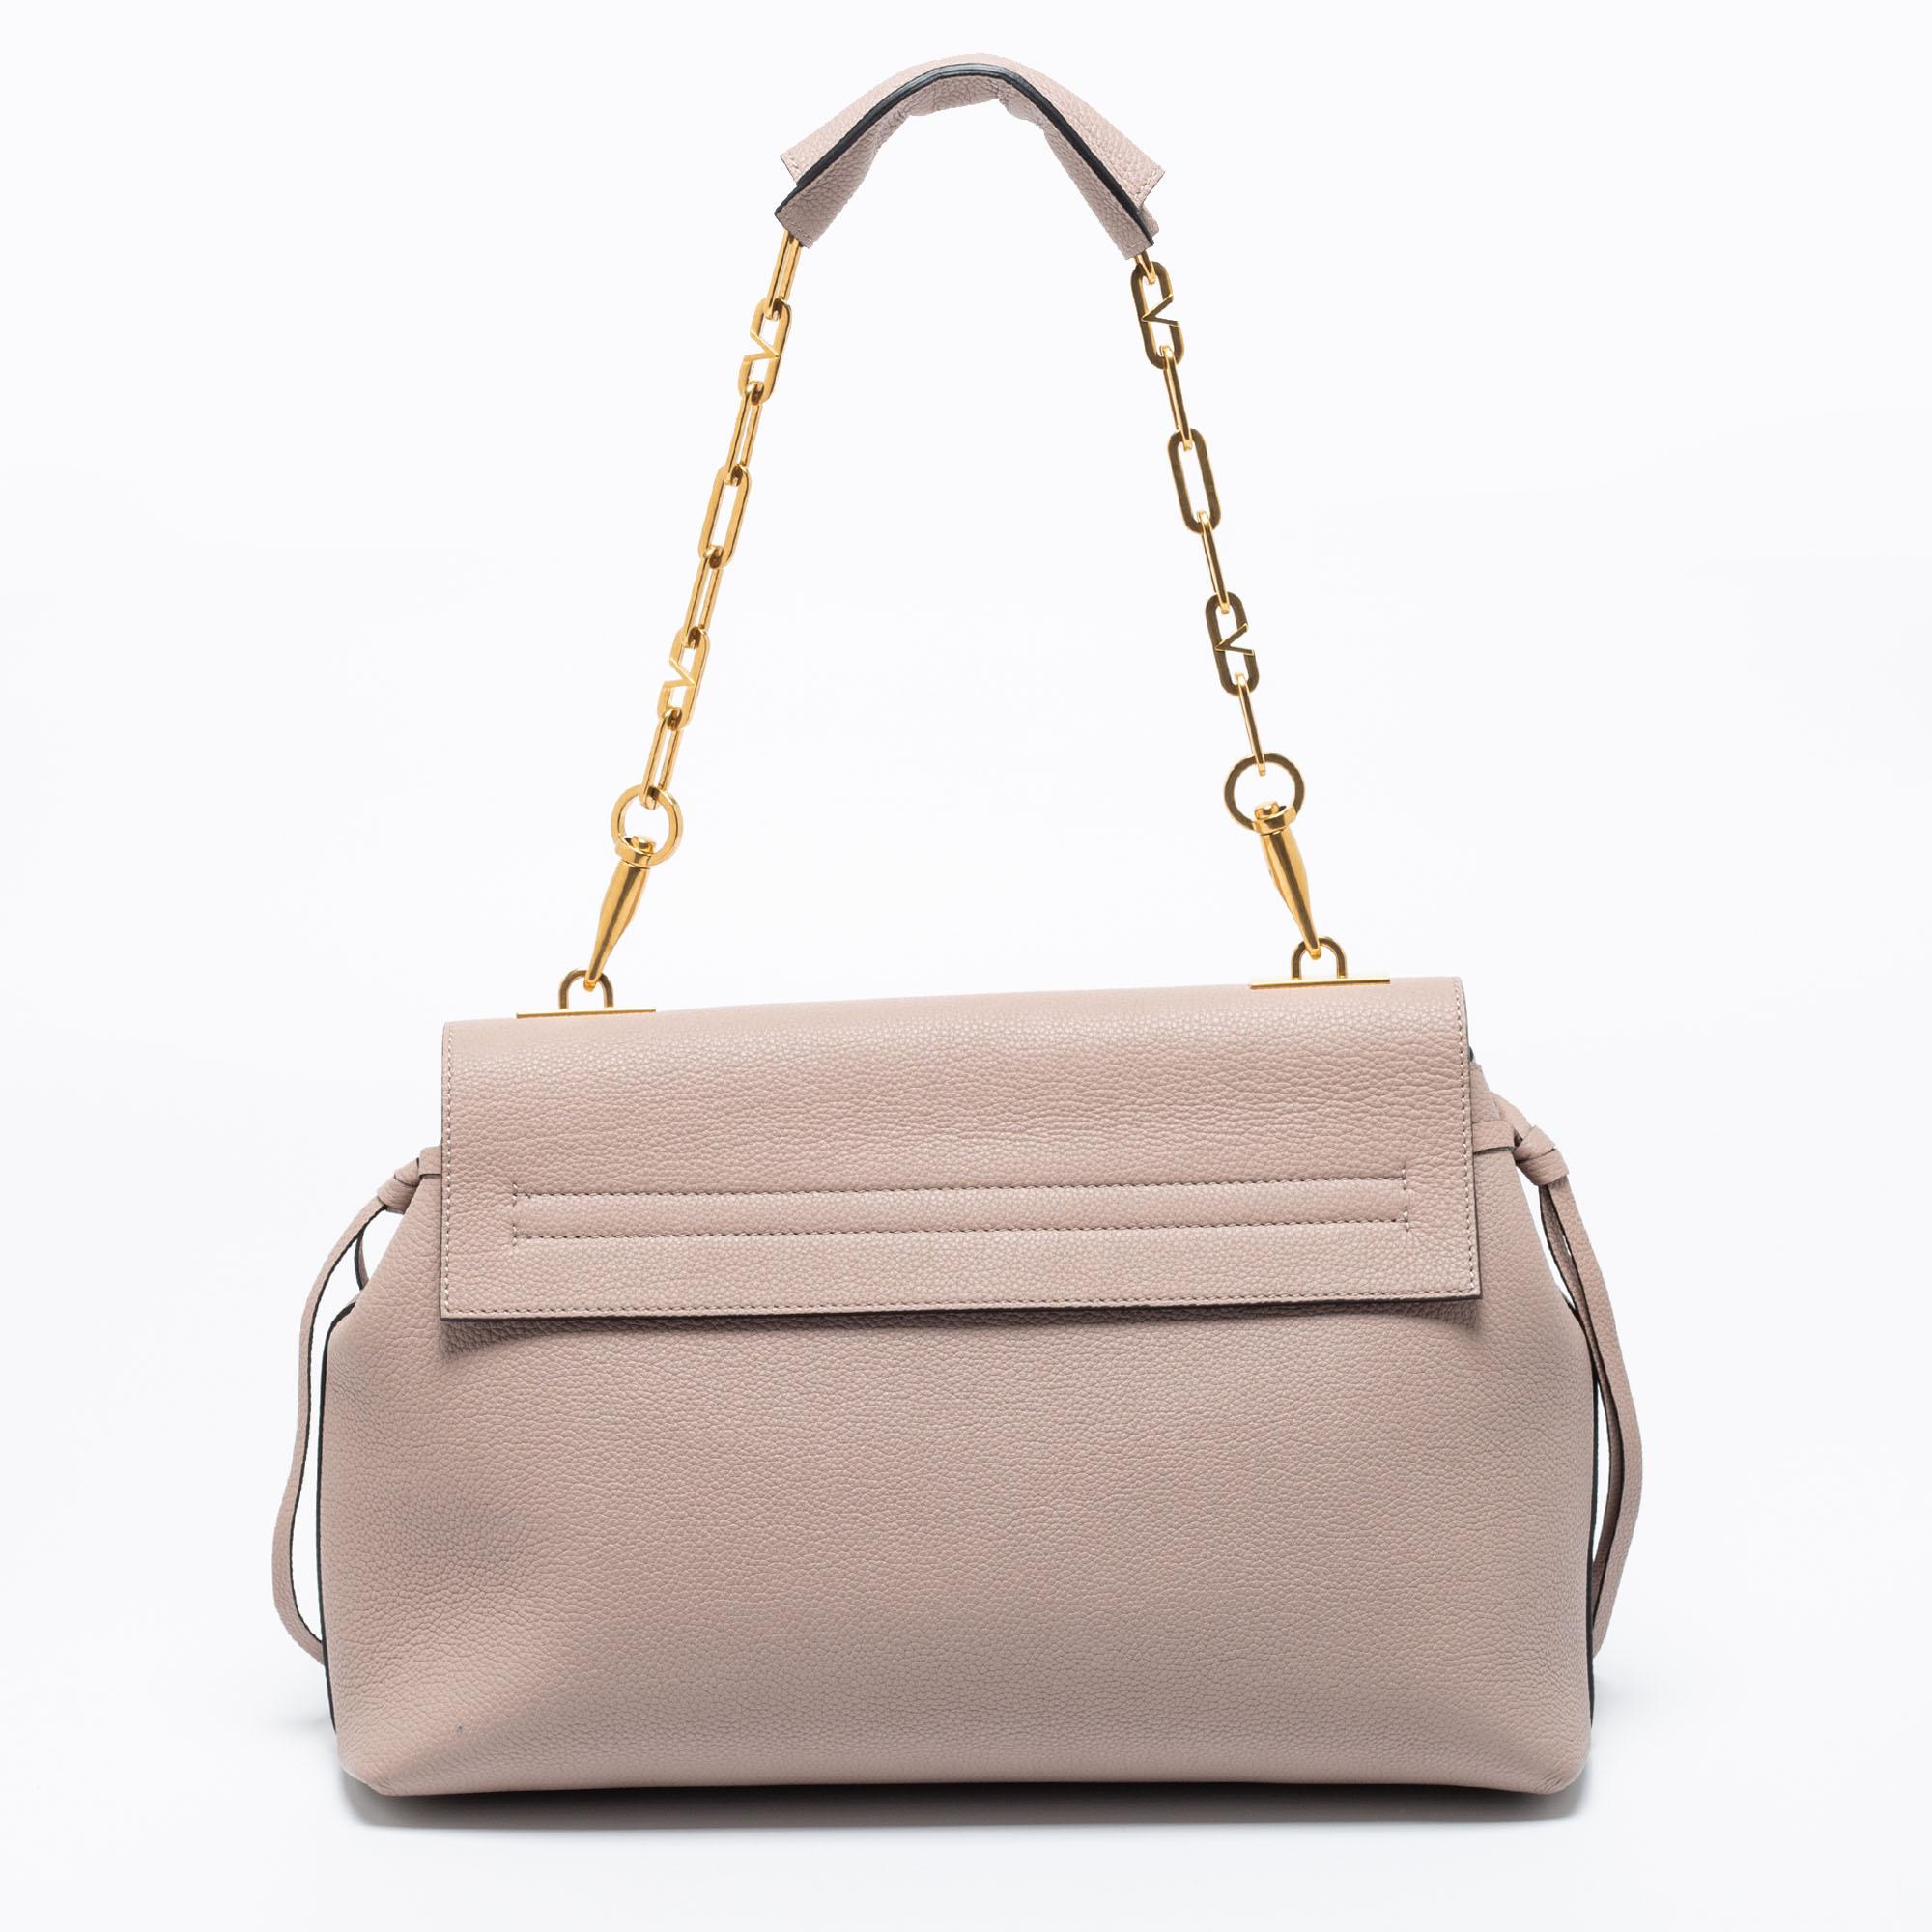 The perfect companion to your feminine style is this beige shoulder bag. The Valentino bag is crafted from grained leather and is designed with a single chain handle and a VRing closure flap to secure the capacious interior.

Includes: brand tag,